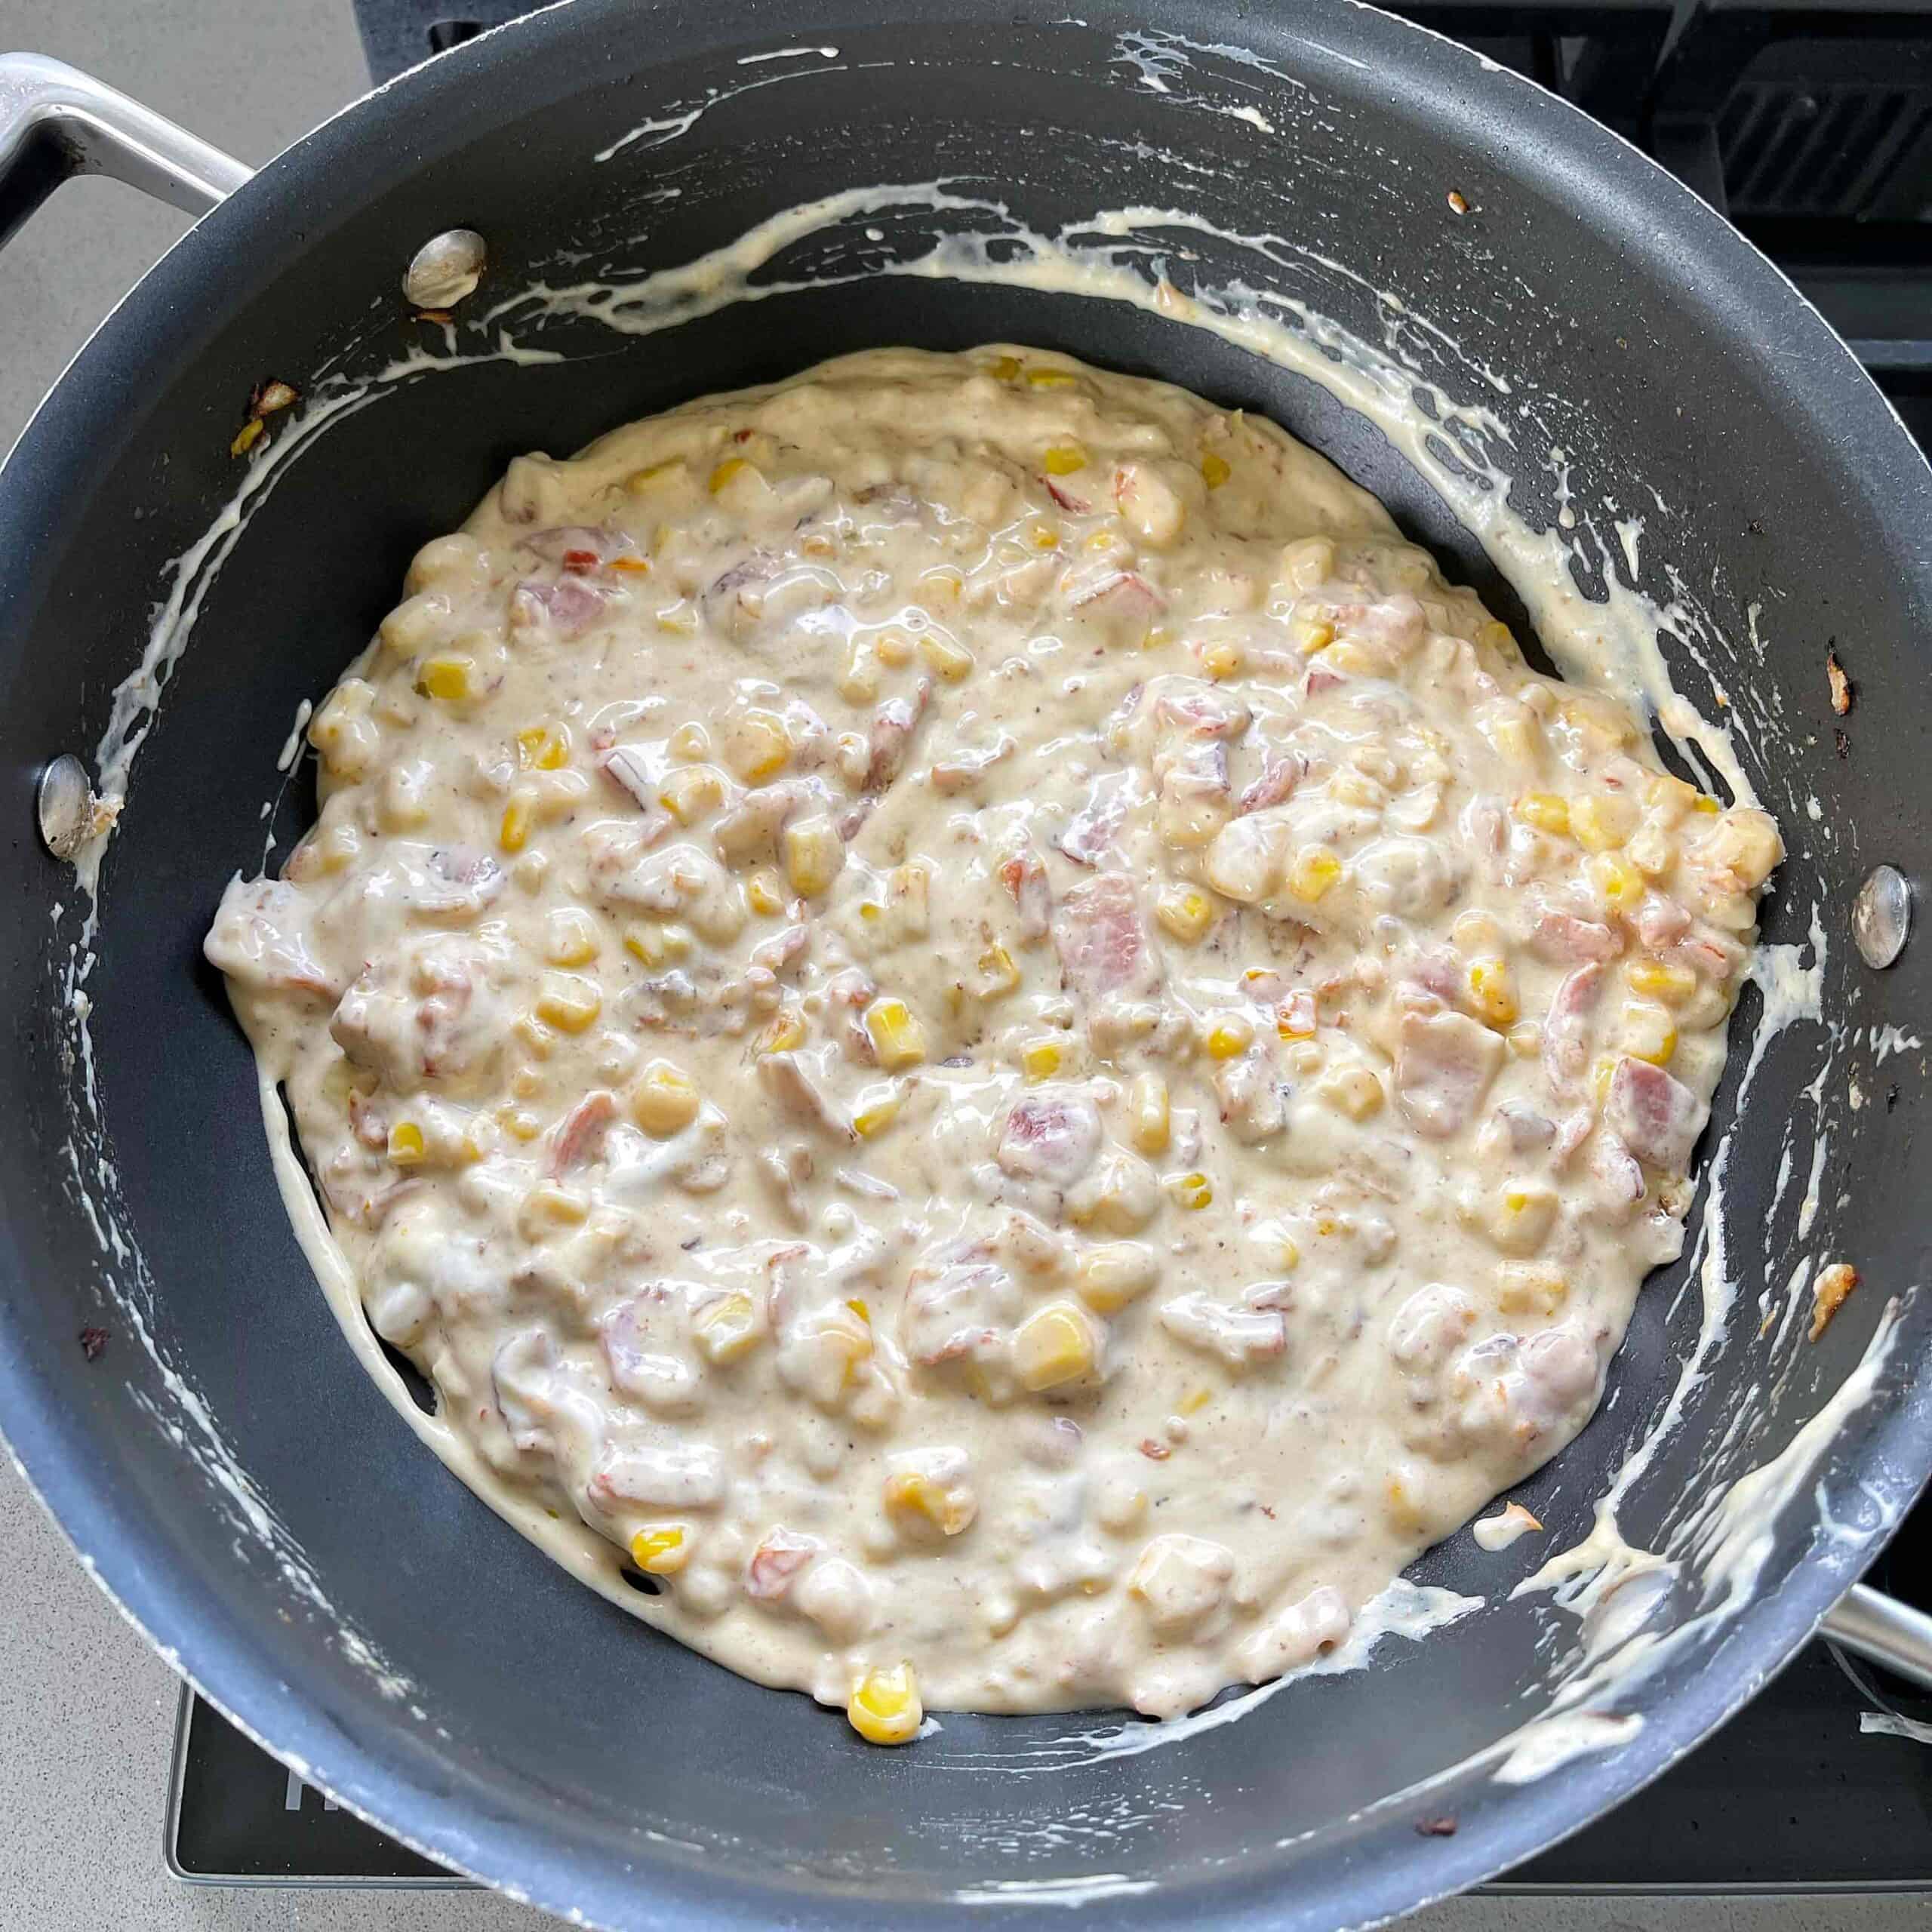 Bacon and corn dip in a frying pan.